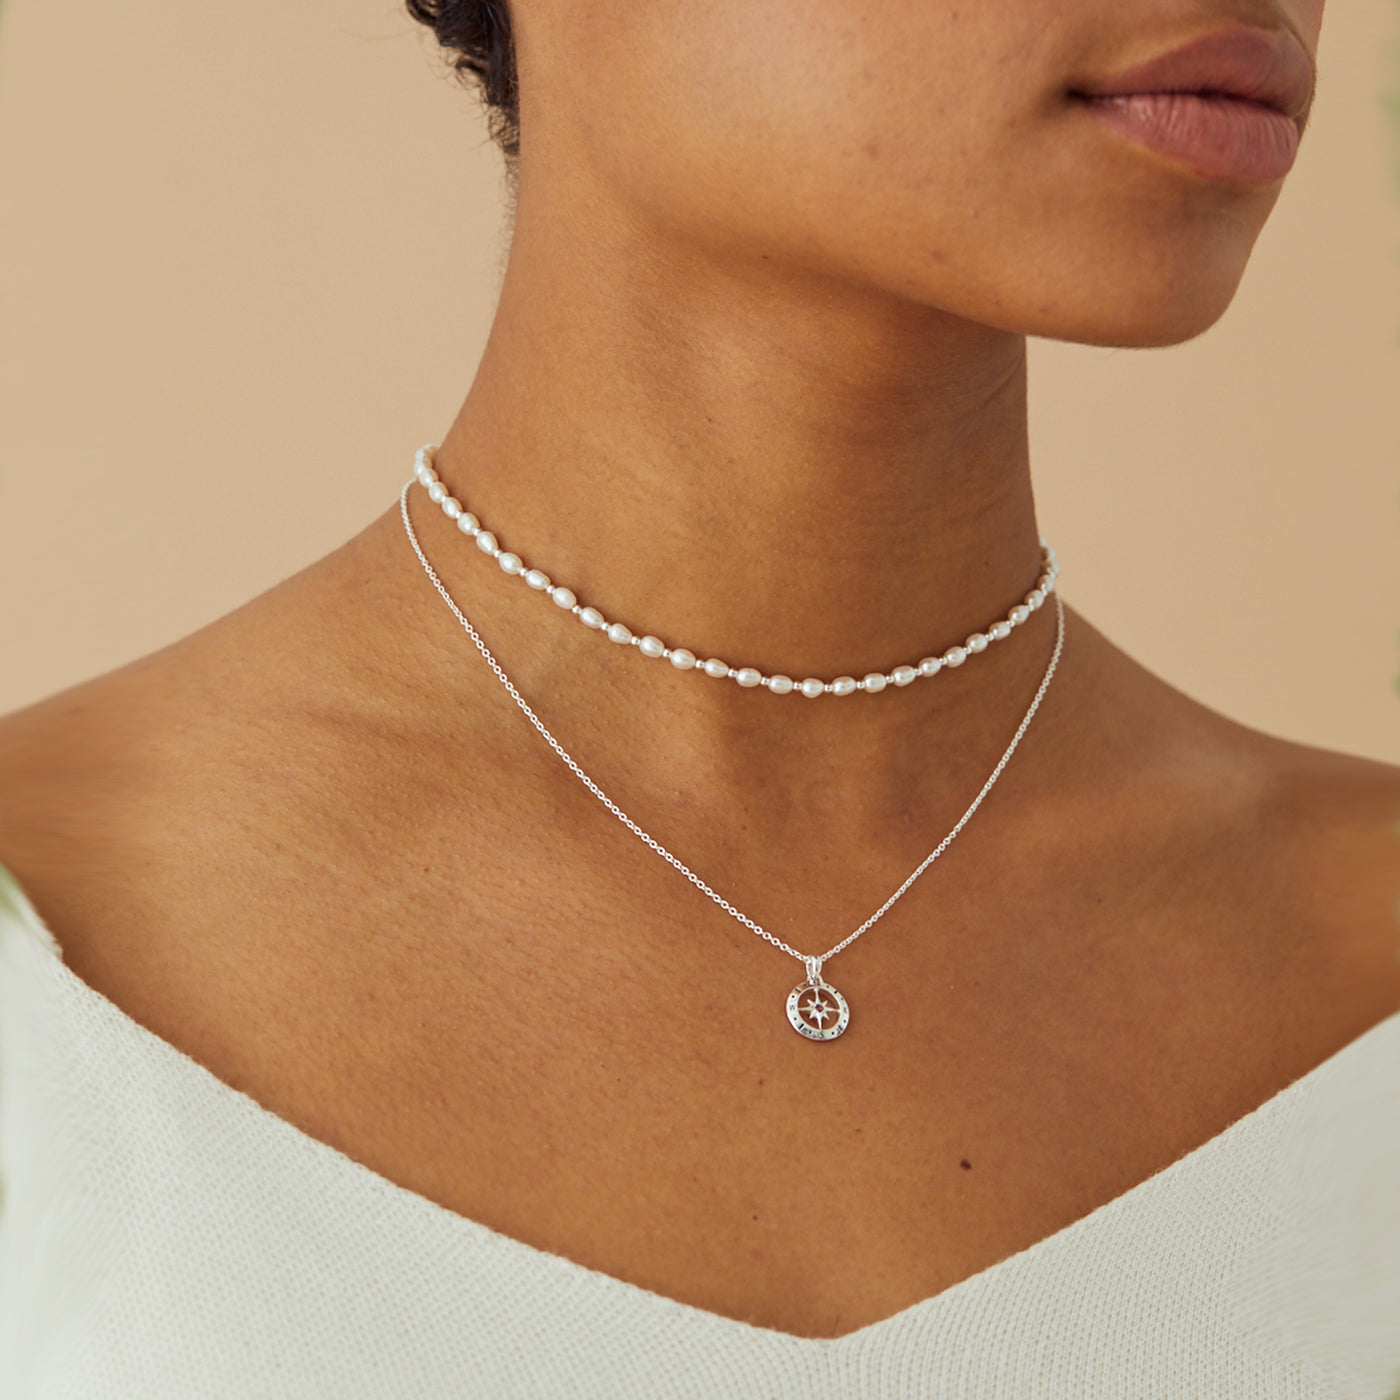 Model Wearing Silver Compass Necklace with August Birthstone Peridot